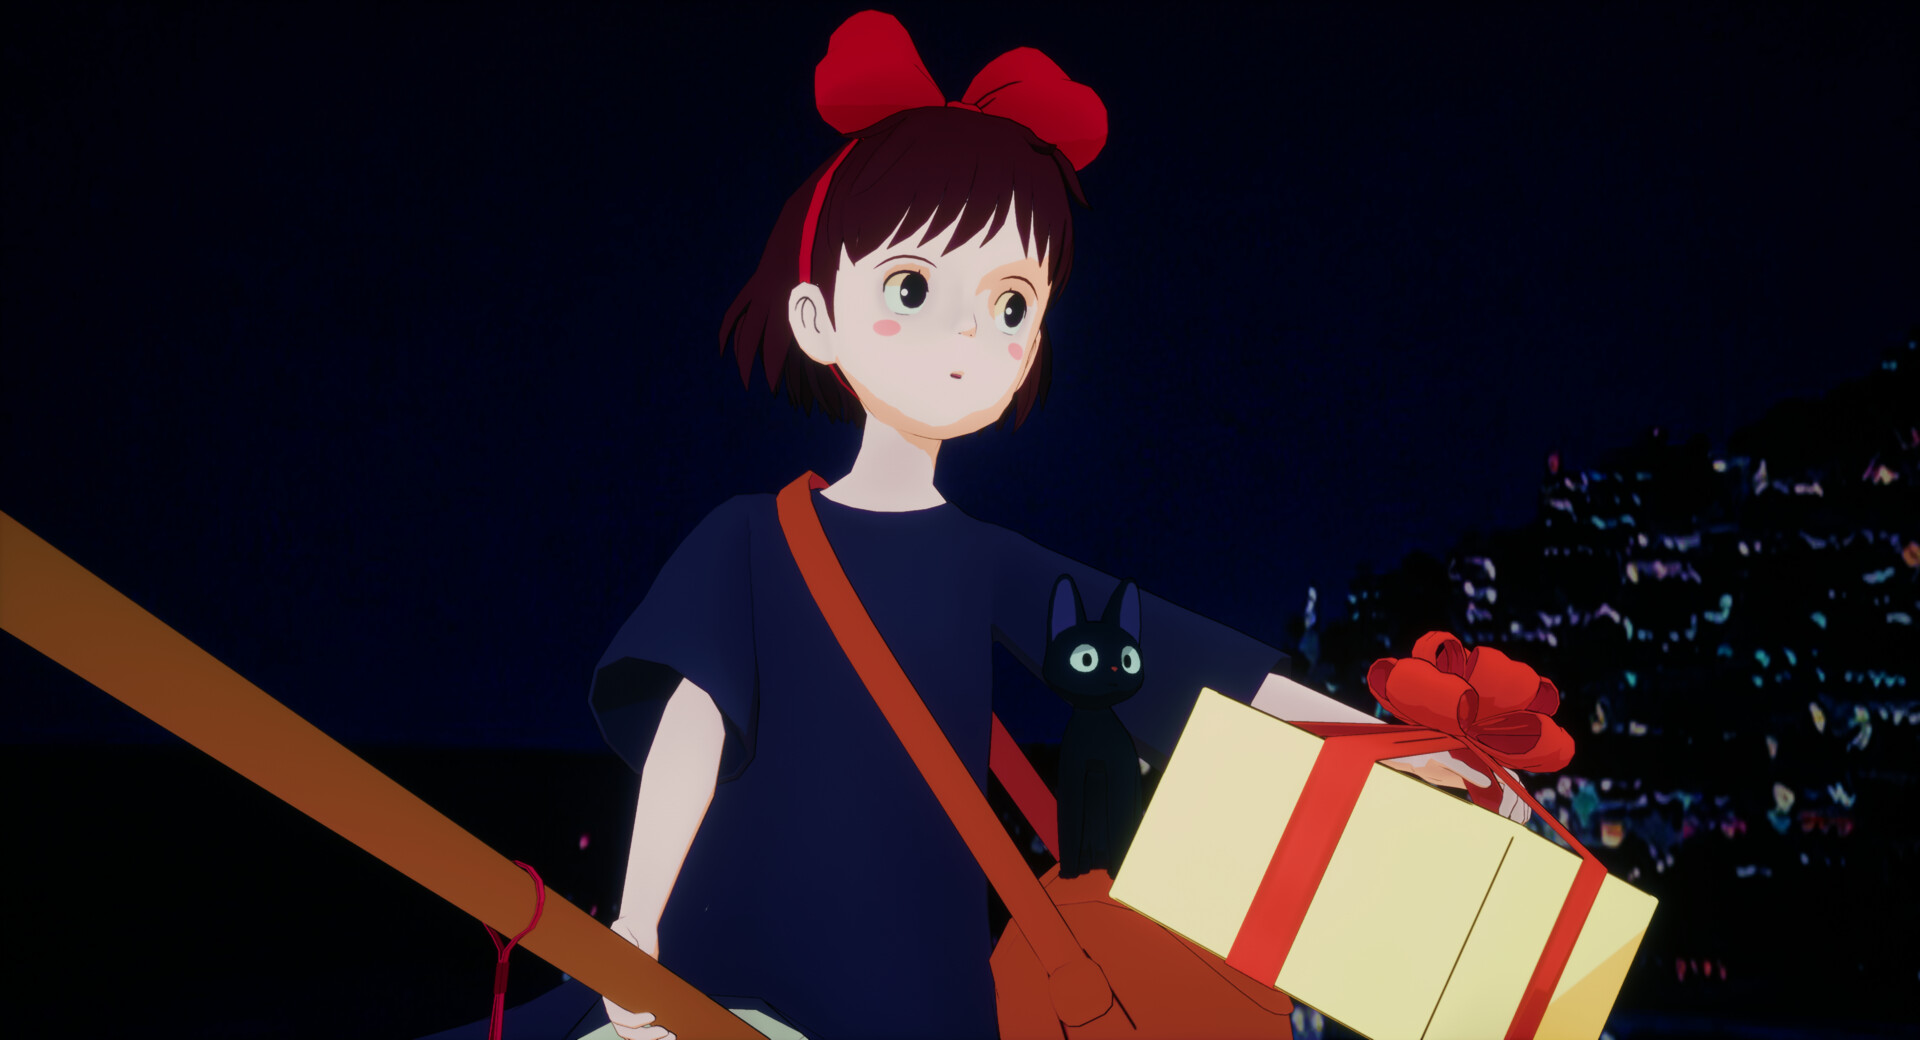 Kiki'S Delivery Service Screenshots Wallpapers